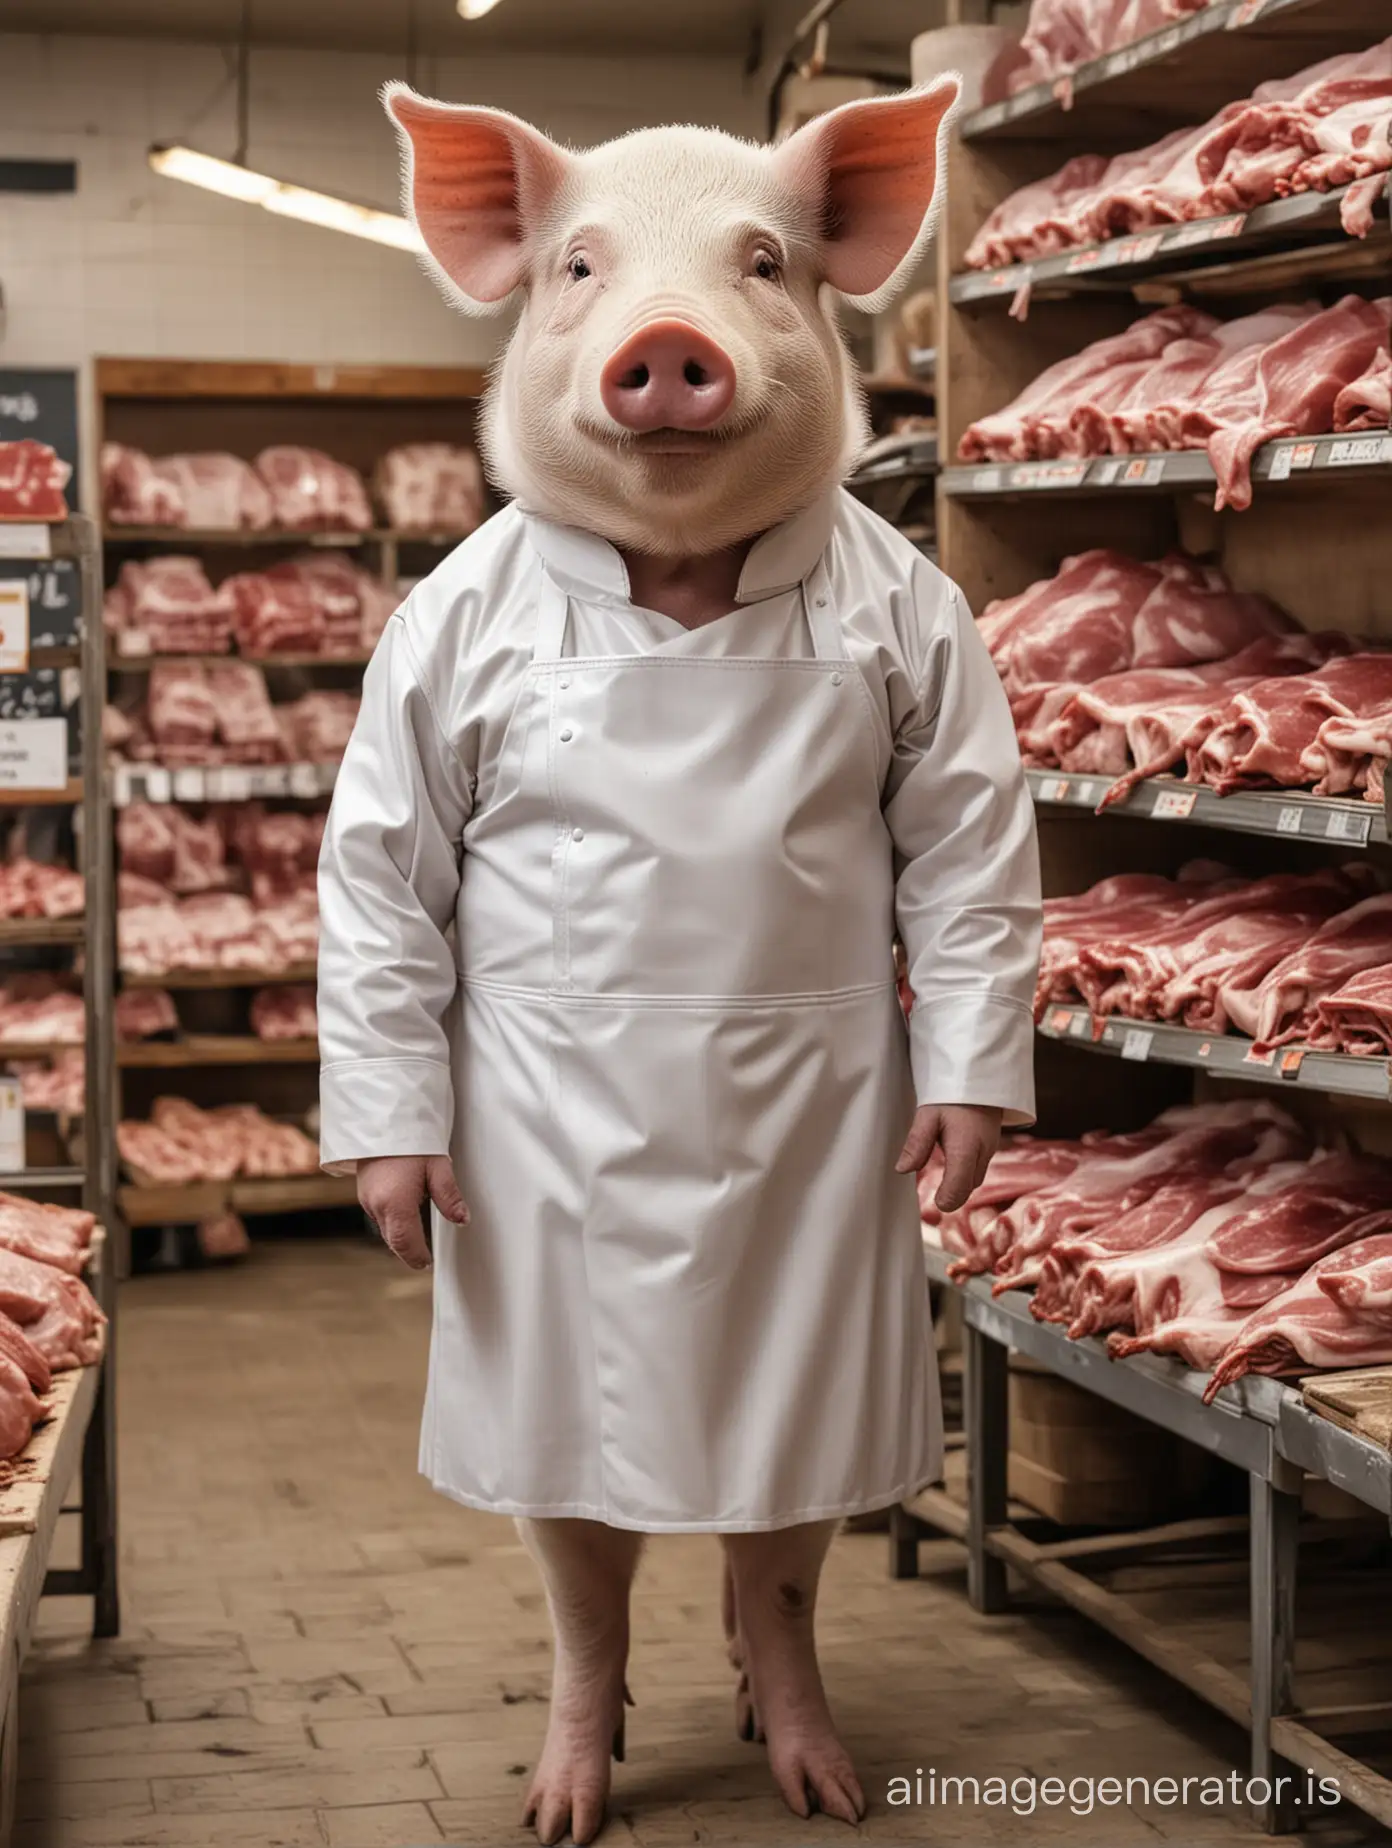 A pig who wears white dress and leather suit on work as butcher in meat store